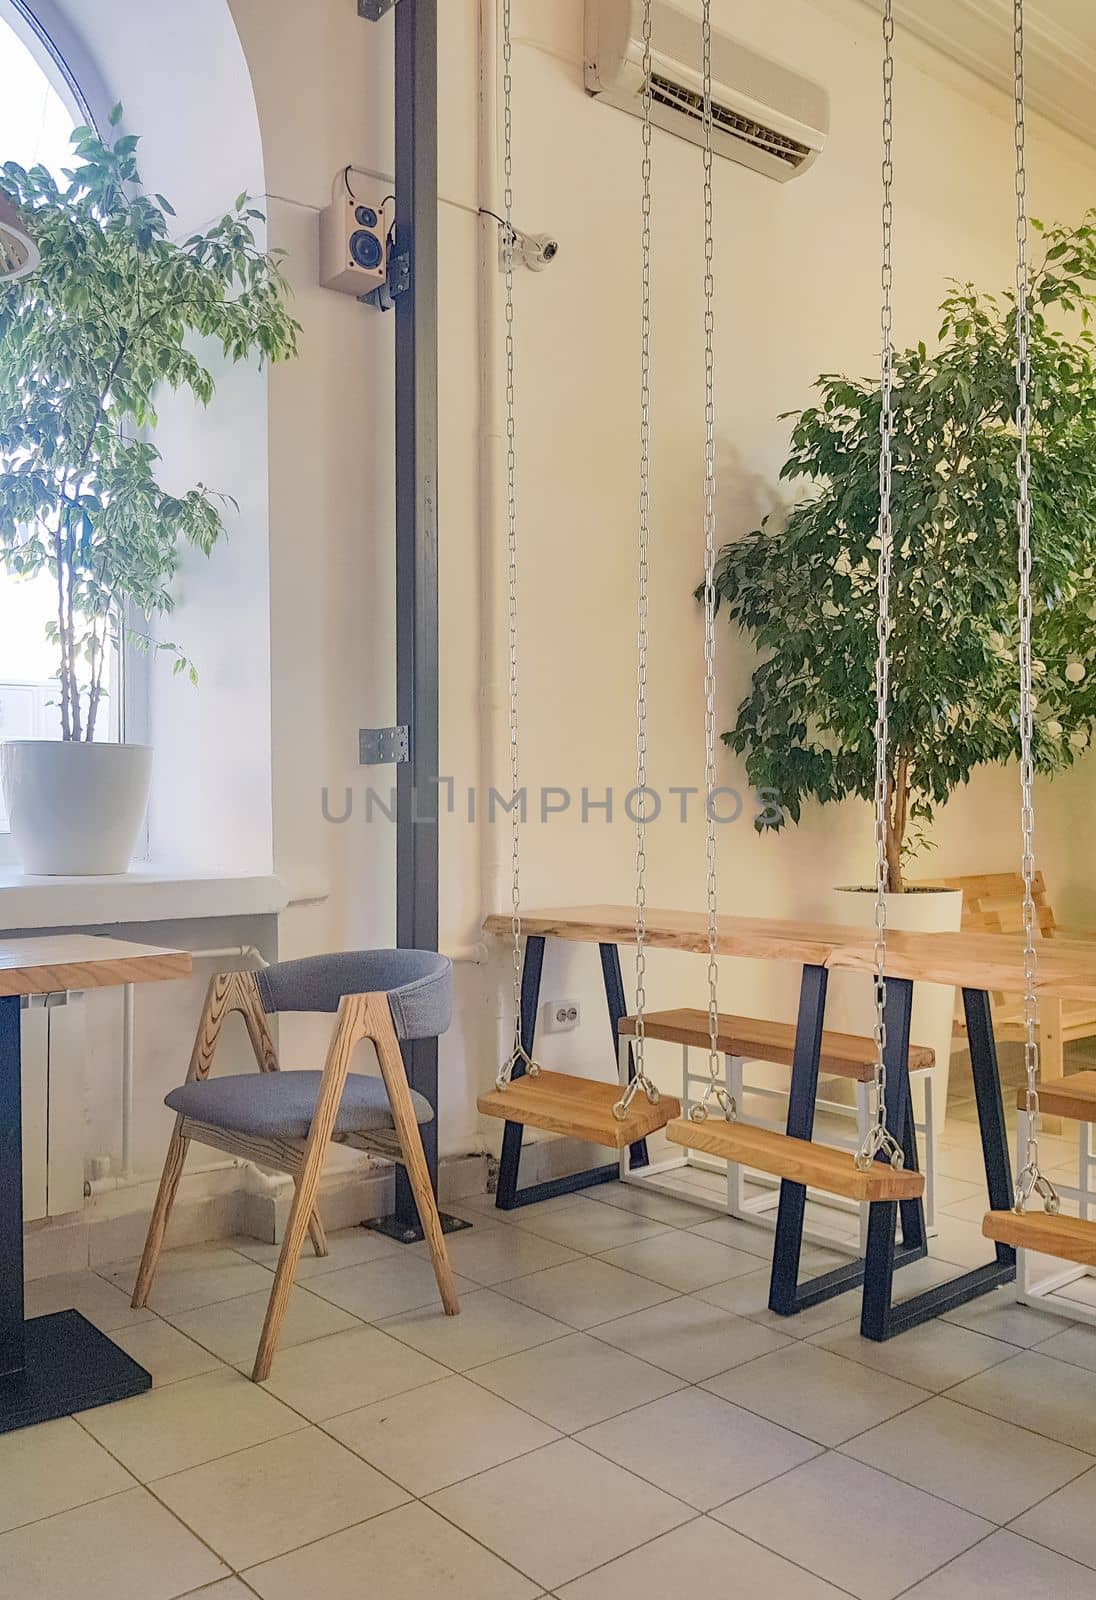 Cozy interior of a modern cafe in vintage style, with wooden tables and swings on chains. vertical photo.